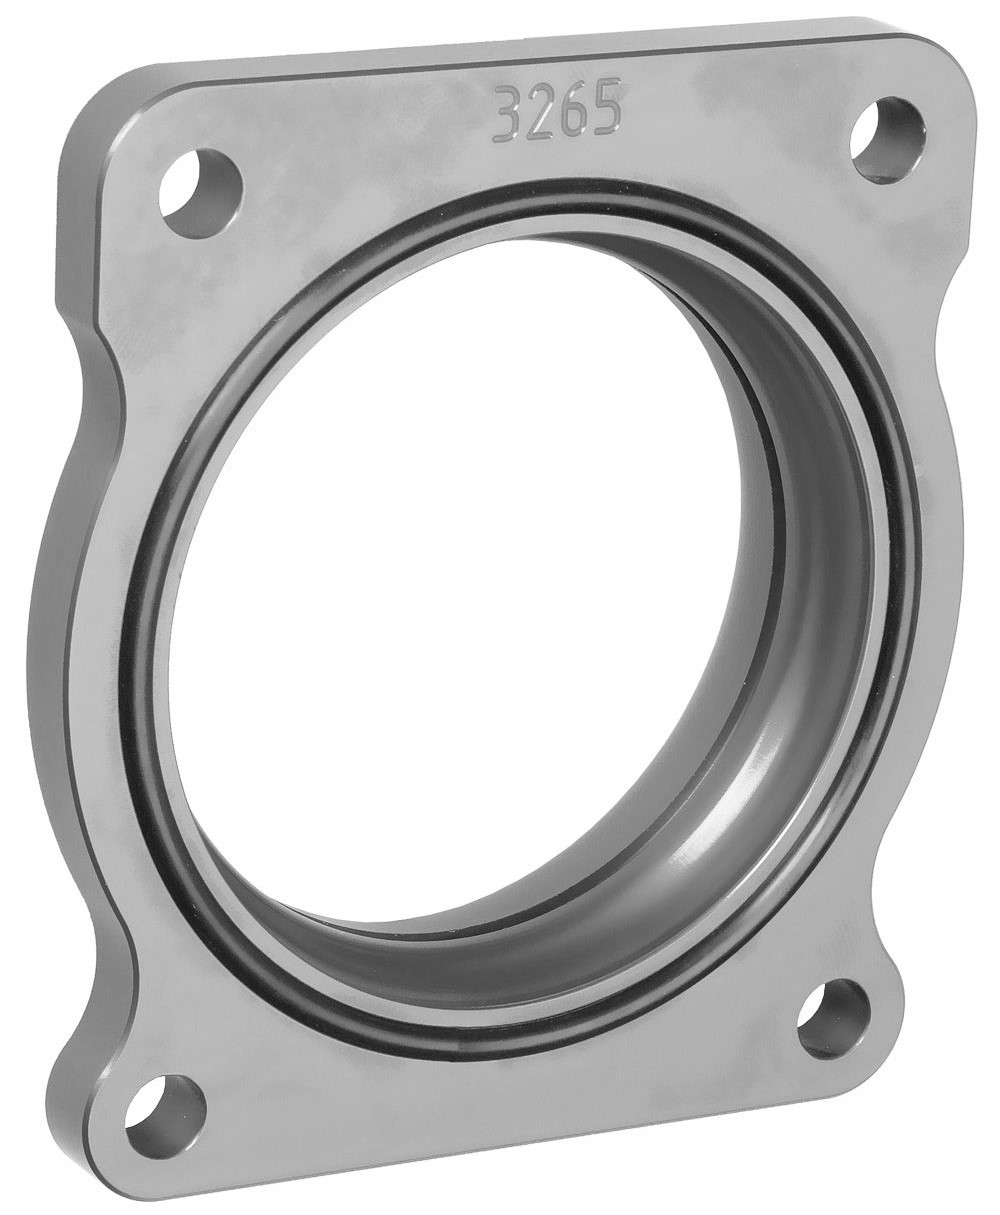 Trans Dapt 3265 Throttle Body Spacer, 1-1/8 in Thick, Gasket / Hardware, Aluminum, Clear Anodized, Ford Modular, Ford Fullsize SUV / Truck 2004-08, Each